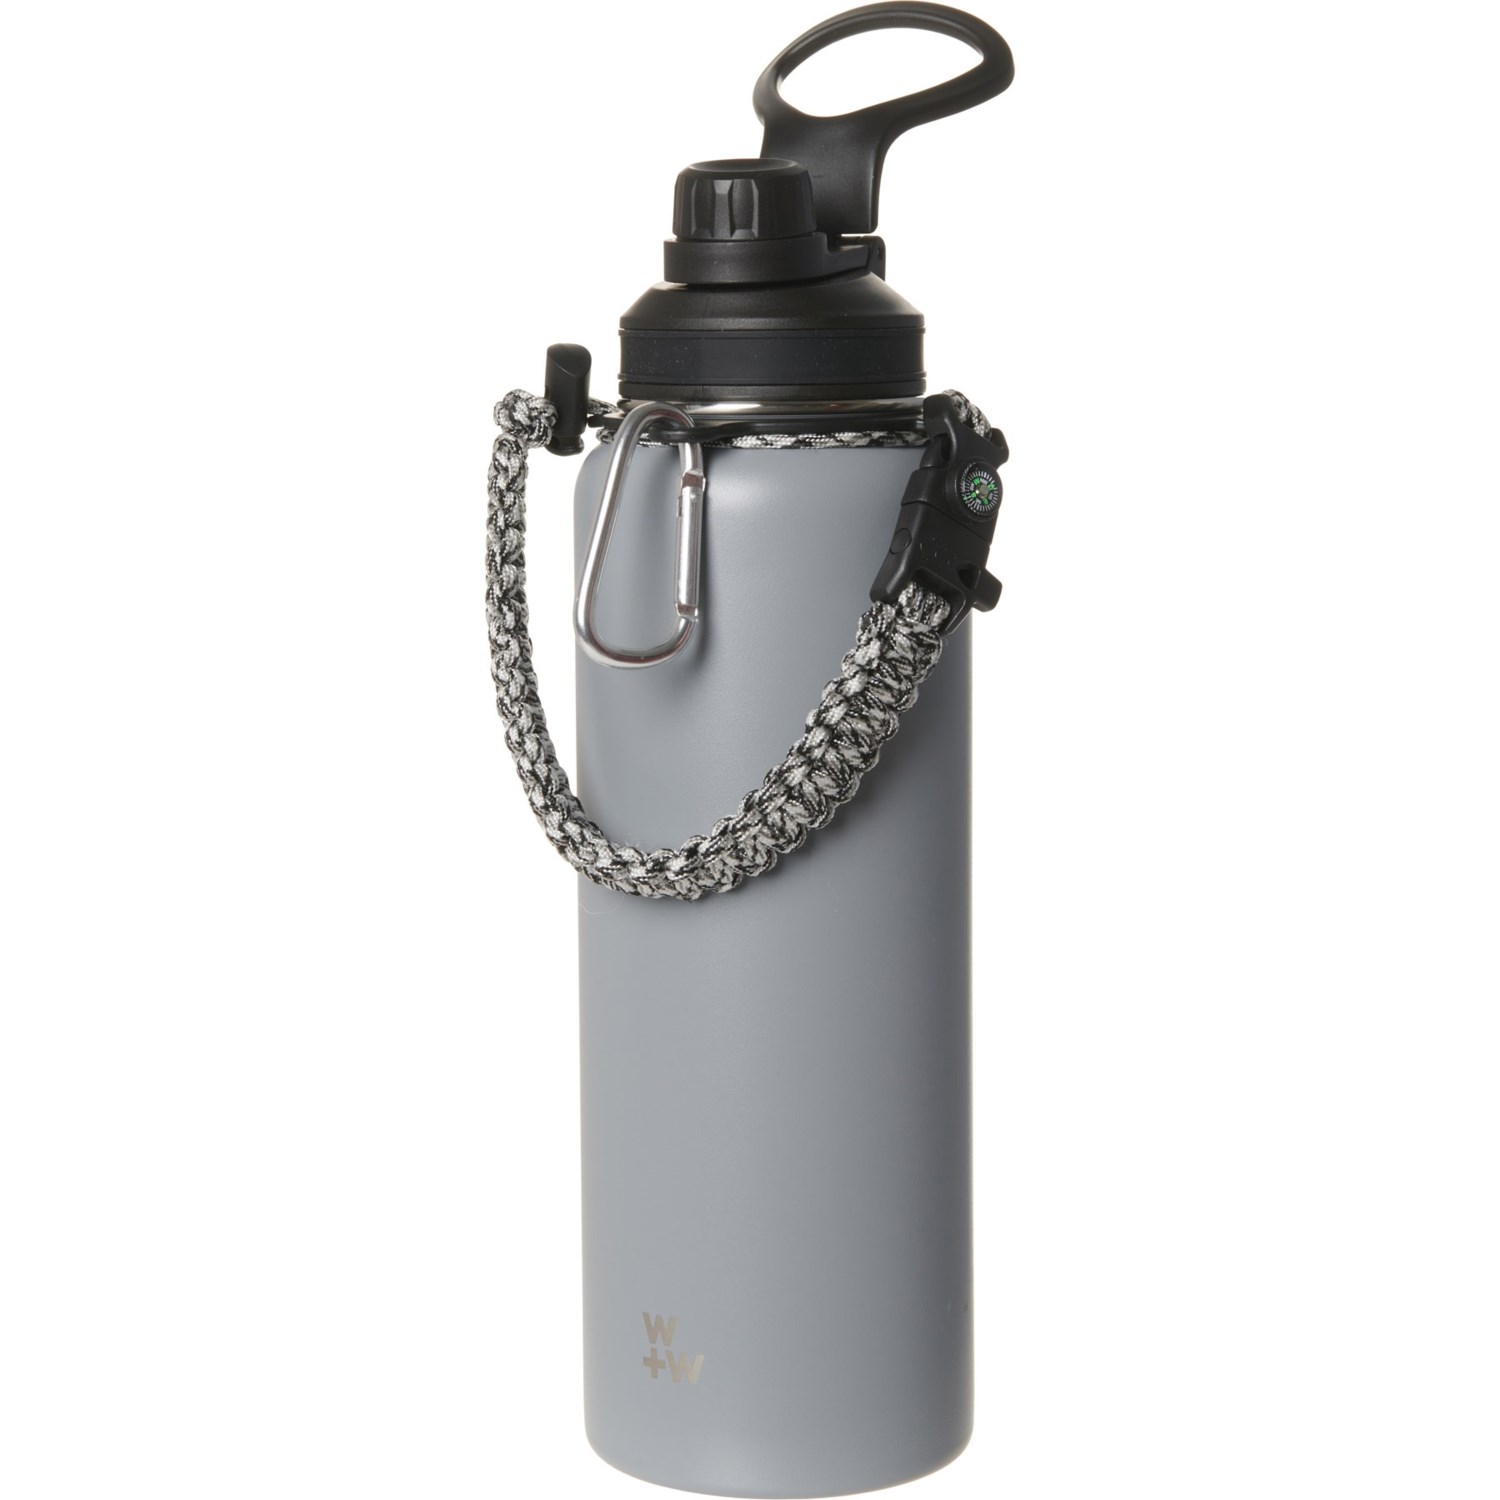 WILD + WOLF Zenith Insulated Chugger Water Bottle with Paracord Handle - 40 oz.